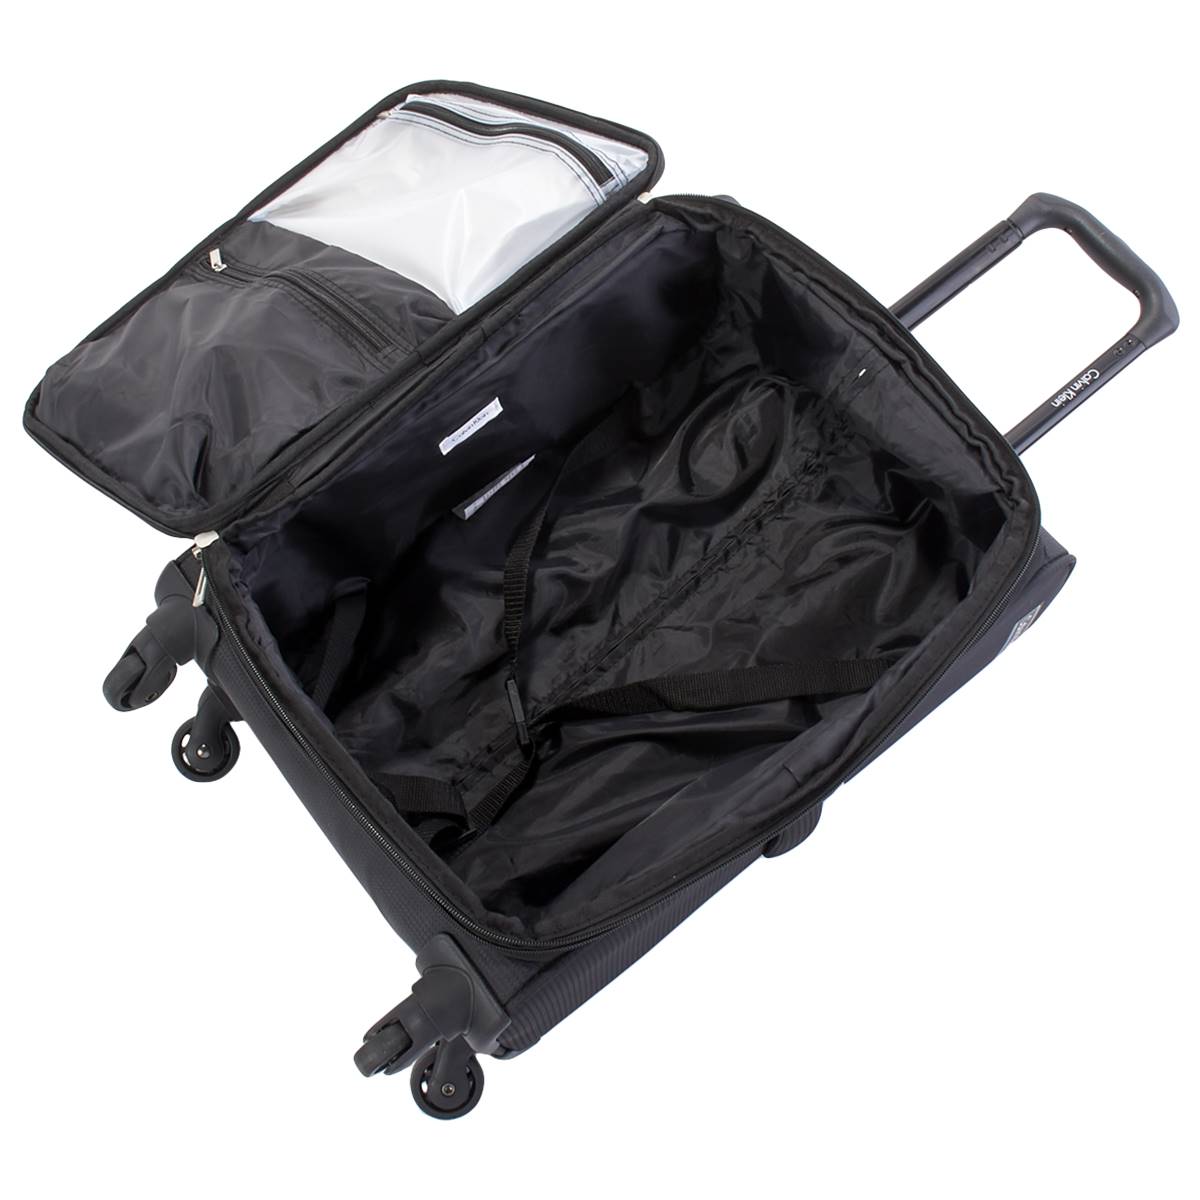 Calvin Klein Travel Line 20in. Carry On Luggage